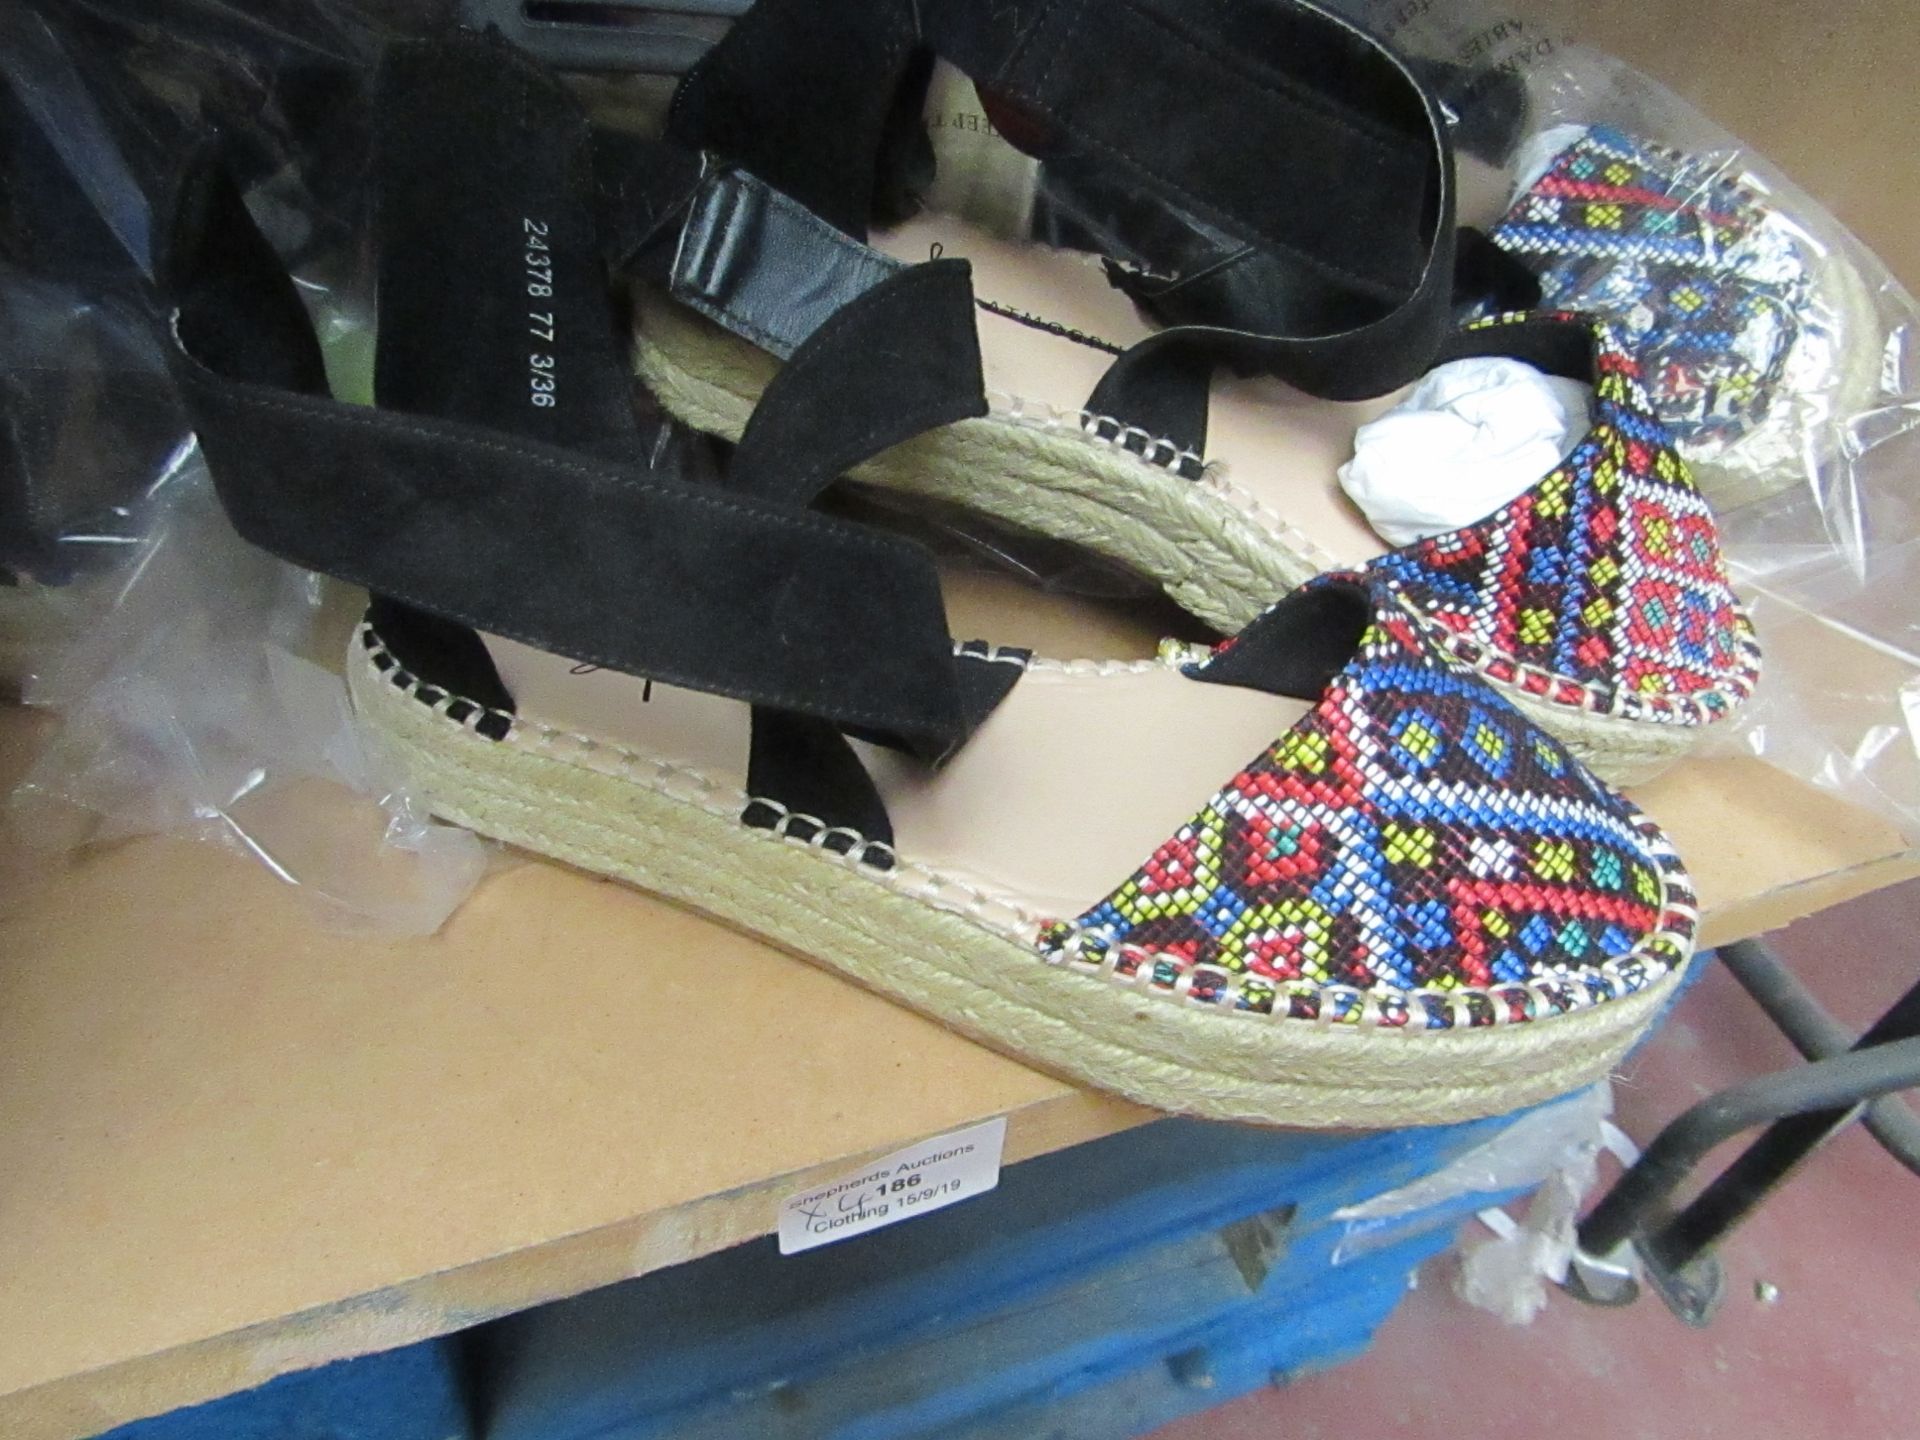 4 x Pairs of Ladies Espadrilles Size 6 Shoes.See Pic for Design.New & Packaged